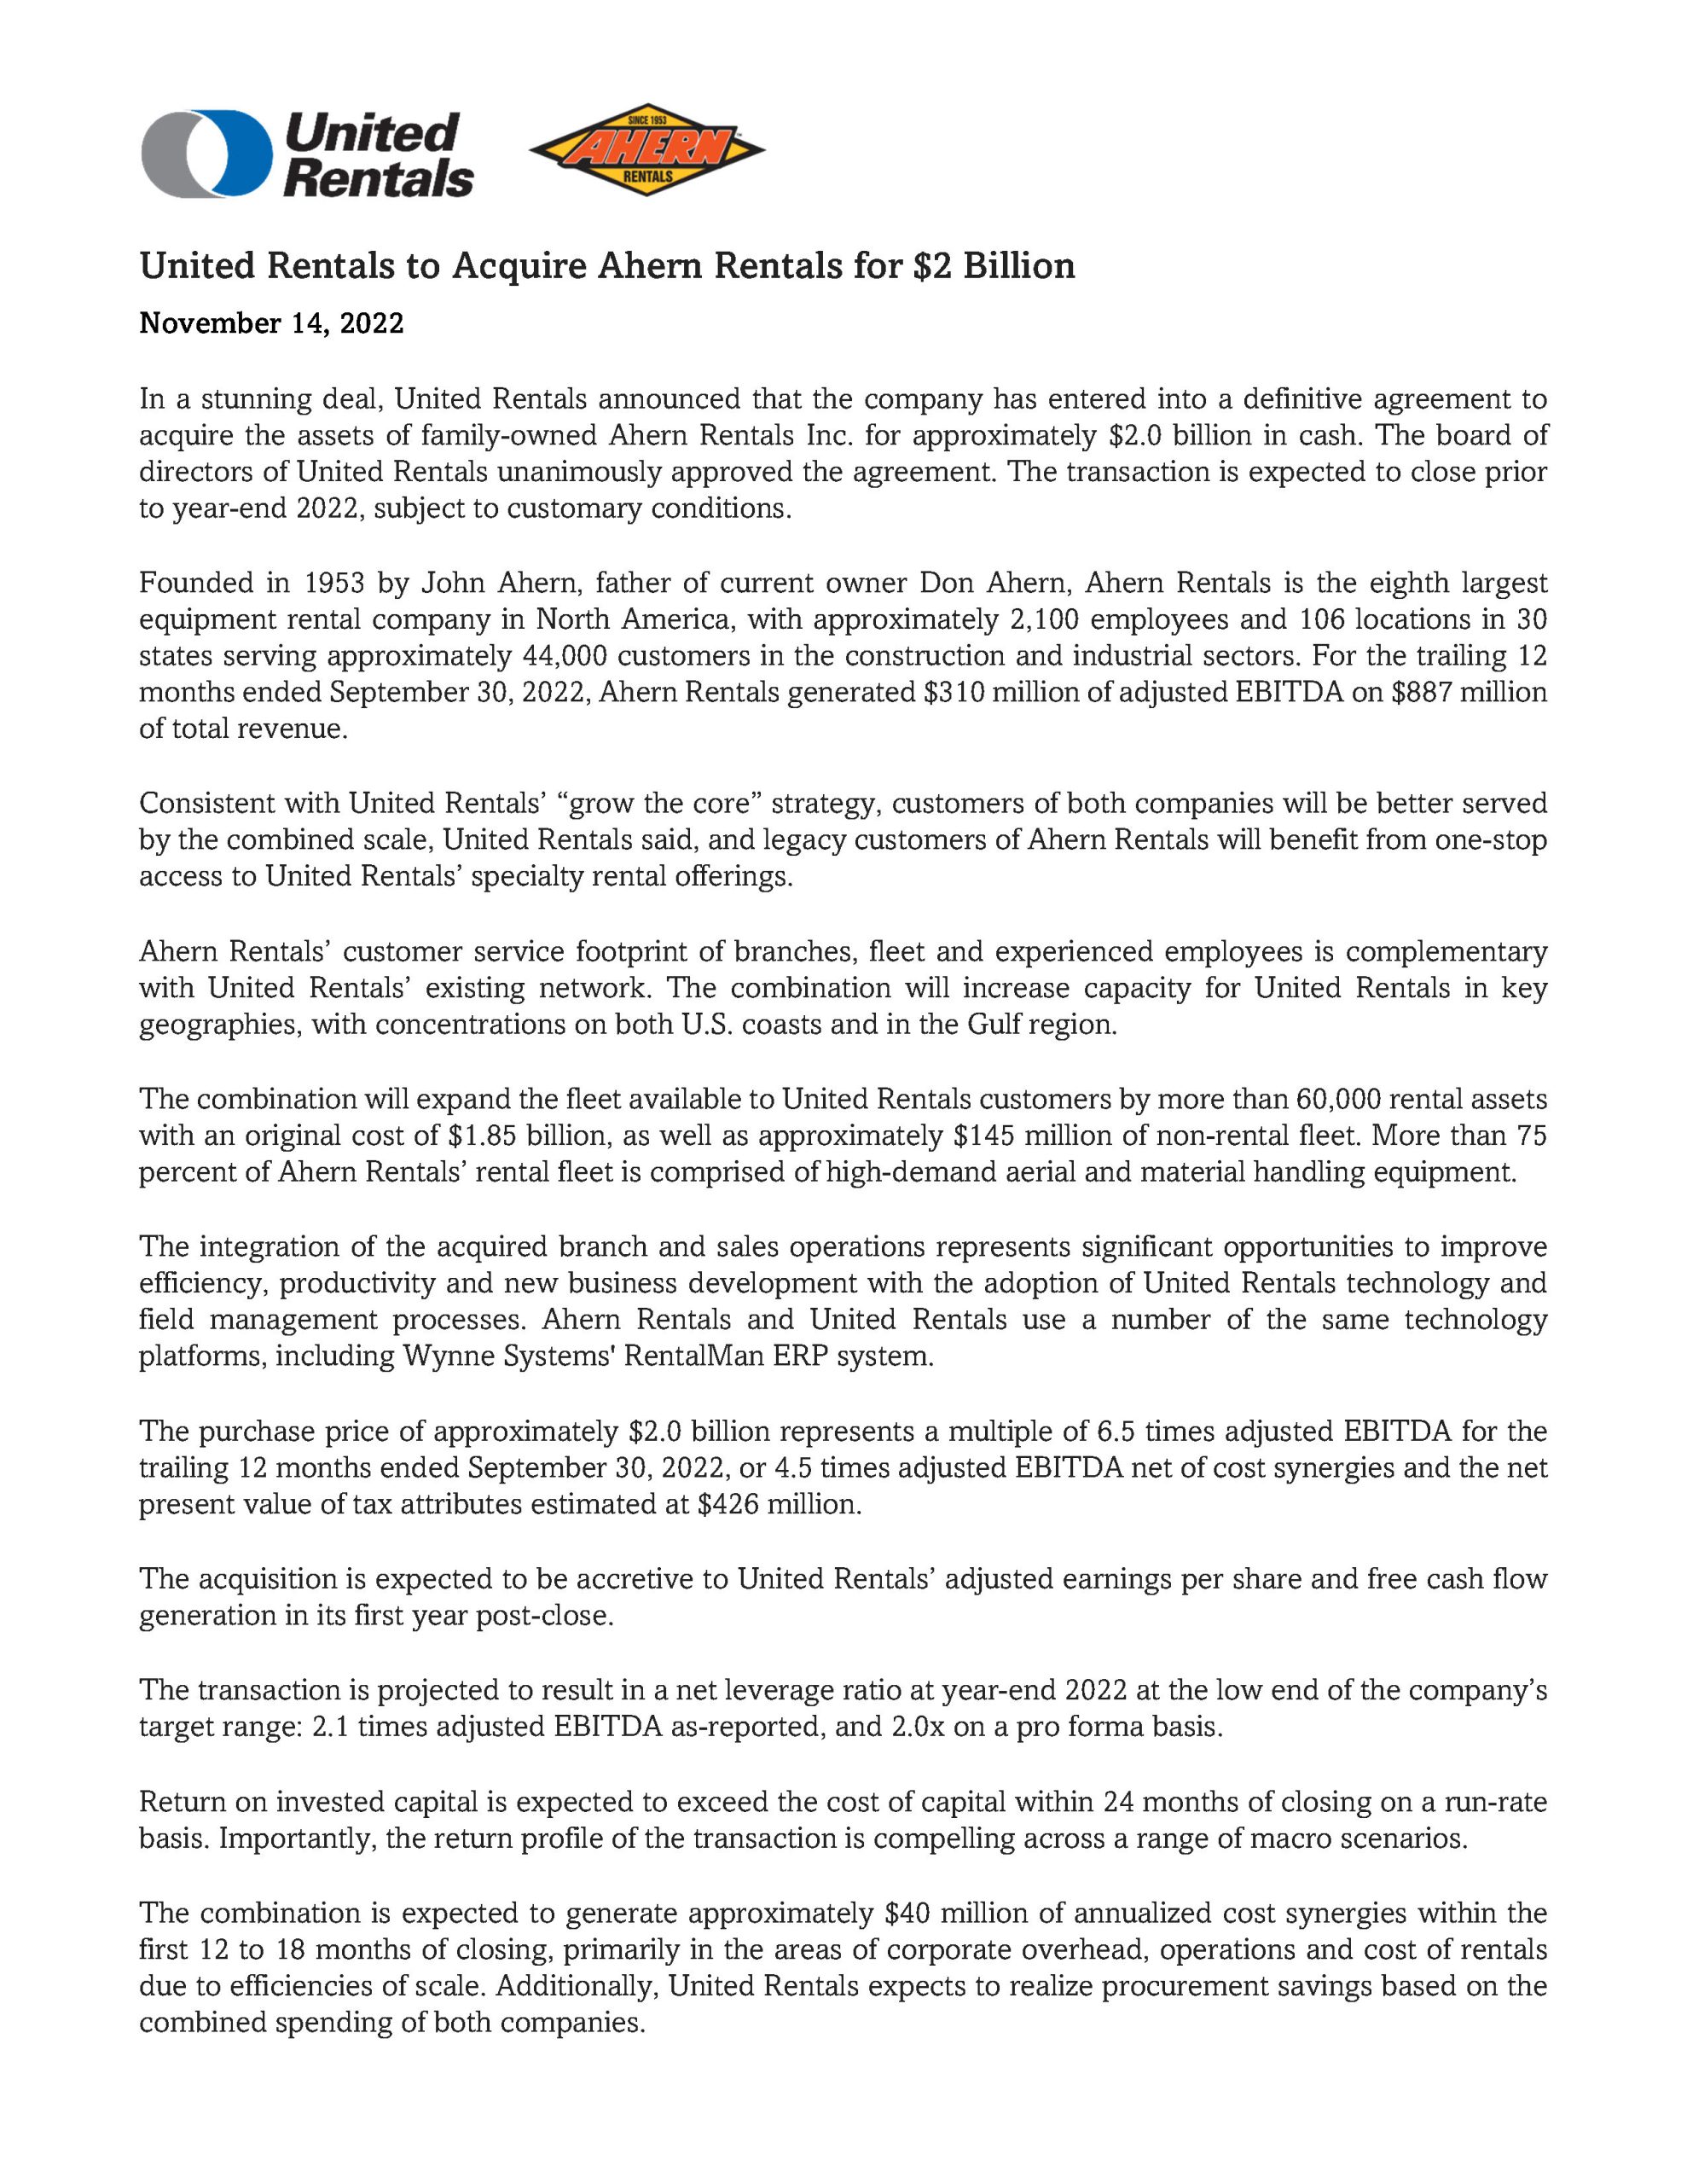 United Rentals to Acquire Ahern Rentals for $2 Billion 11.14.2022_Page_1